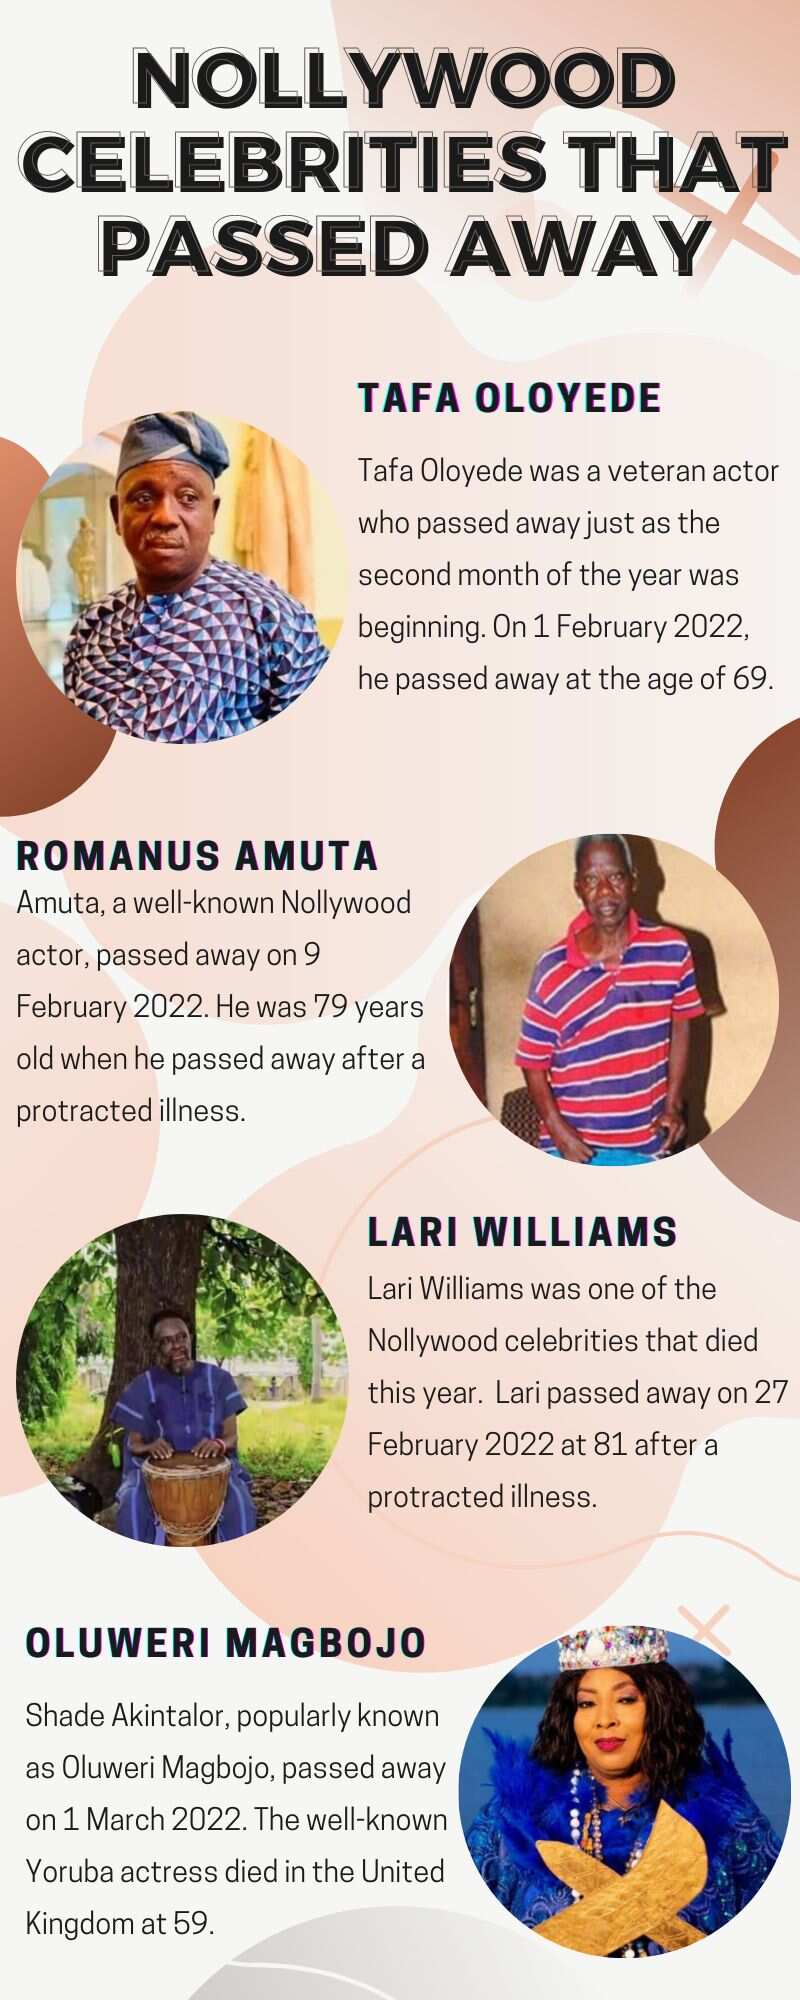 Nollywood celebrities that passed away in the year 2022